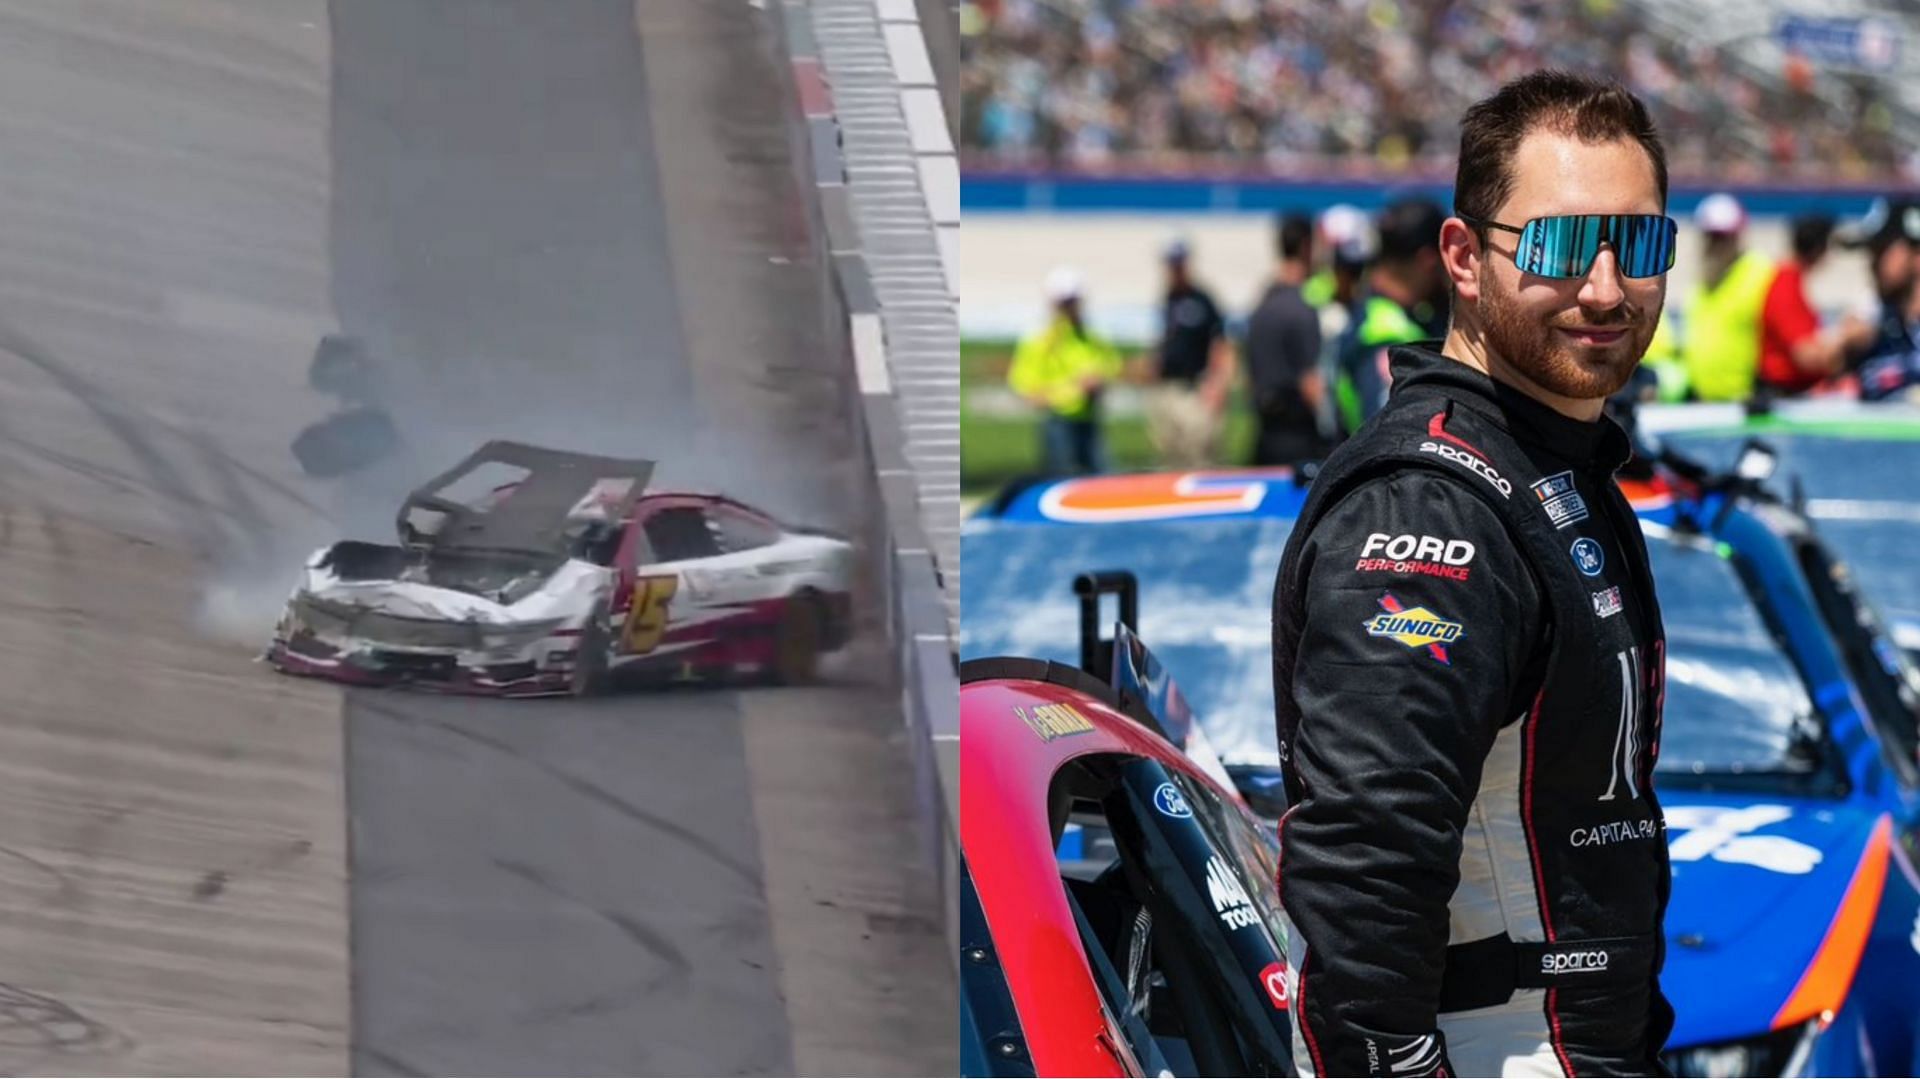 Kaz Grala crashes during practice race for NASCAR Cup Series W&uuml;rth 400 at Dover Motor Speedway (Image from X)